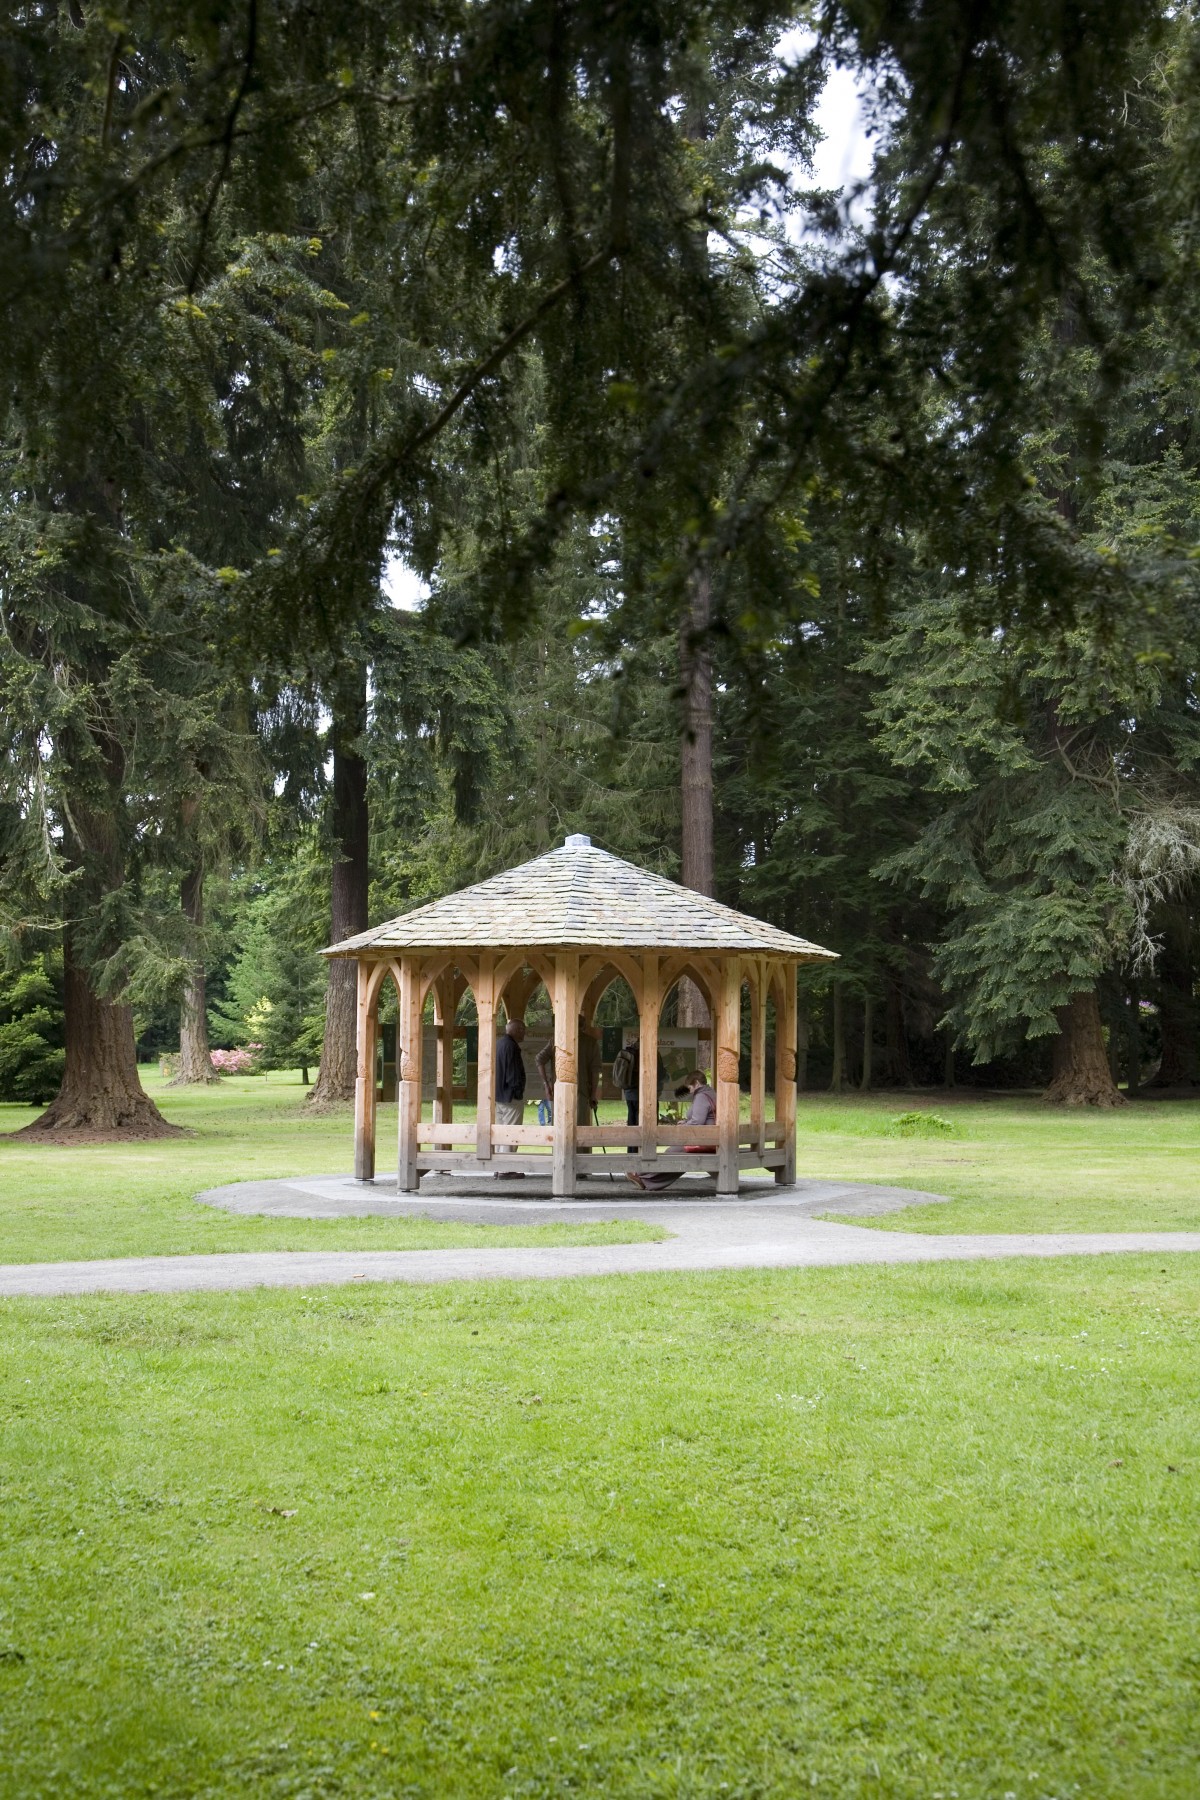 There are many places to sit and enjoy the gardens within the grounds of Scone Palace.